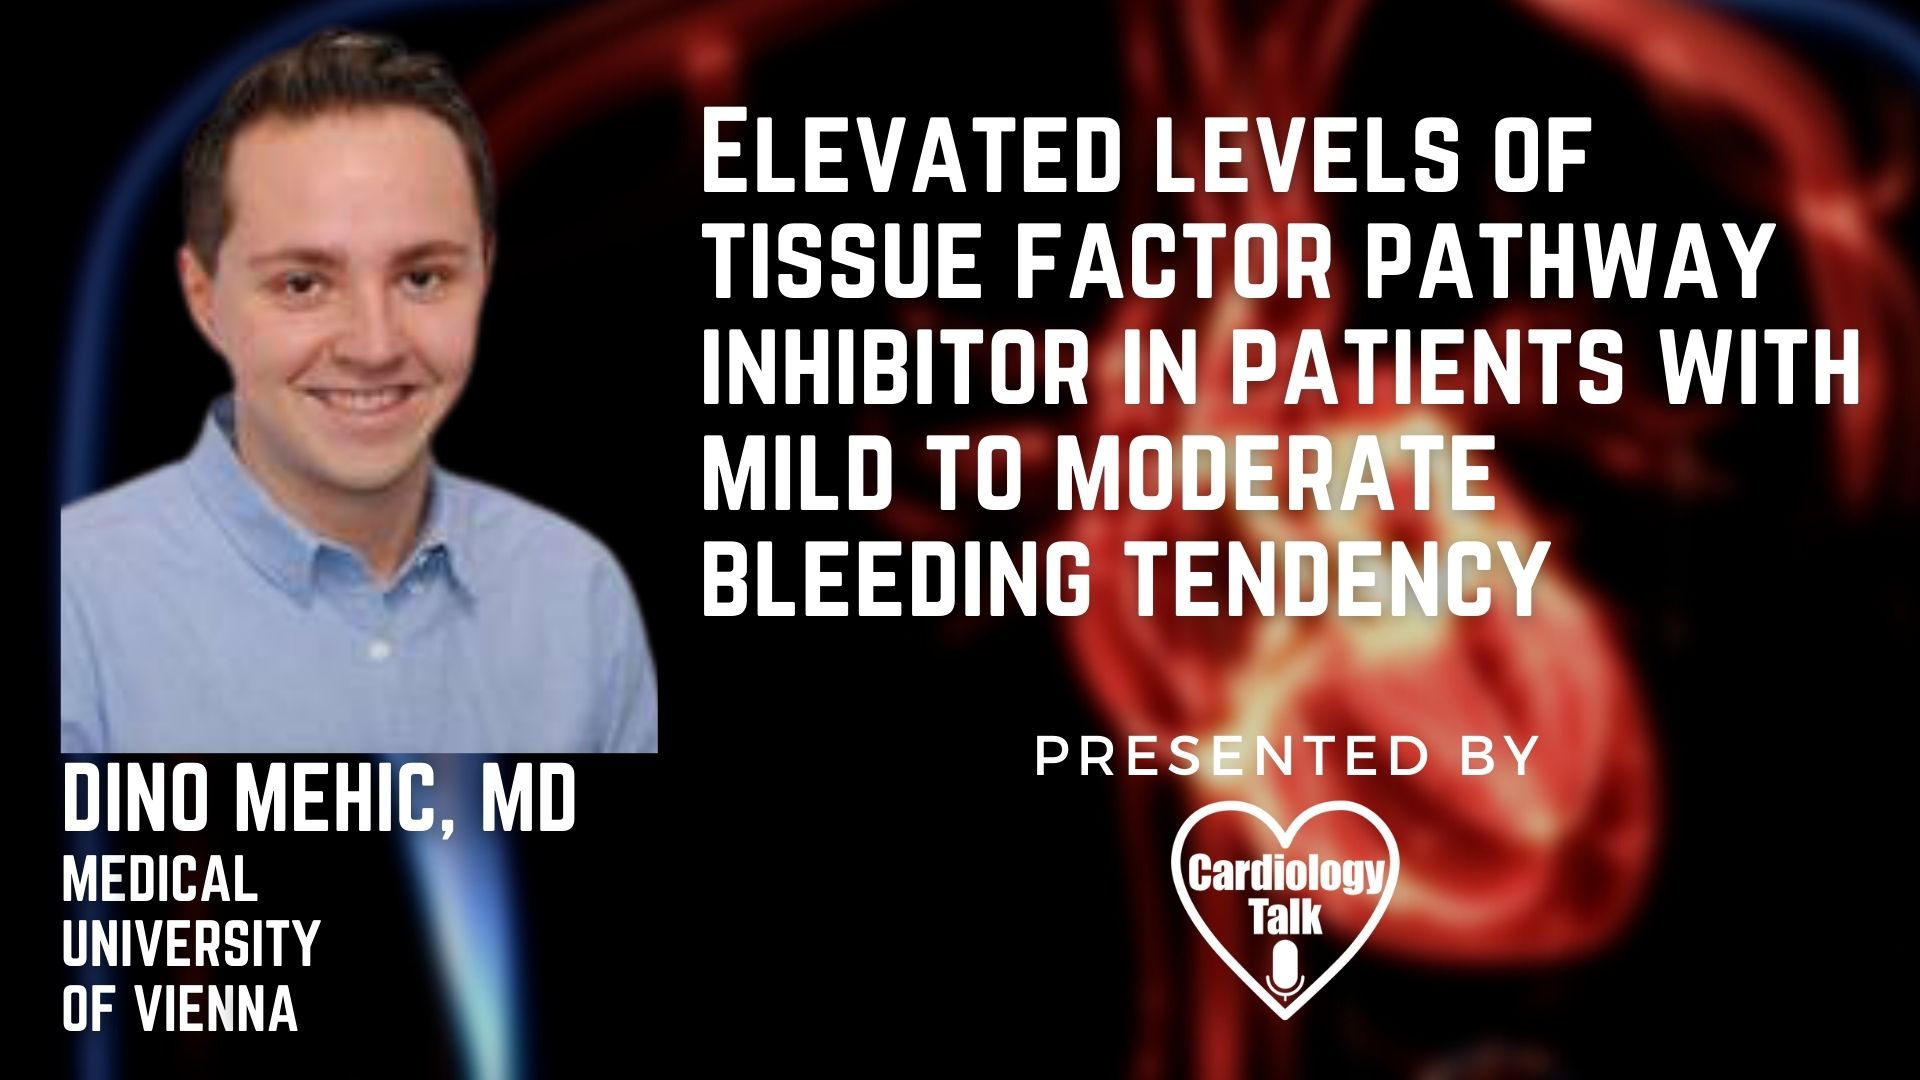 Dino Mehic, MD @dino_mehic @Cihan_Ay_MD @MedUni_Wien #Haemostasis #Cardiology #Research Elevated Levels Of Tissue Factor Pathway Inhibitor In Patients With Mild To Moderate Bleeding Tendency